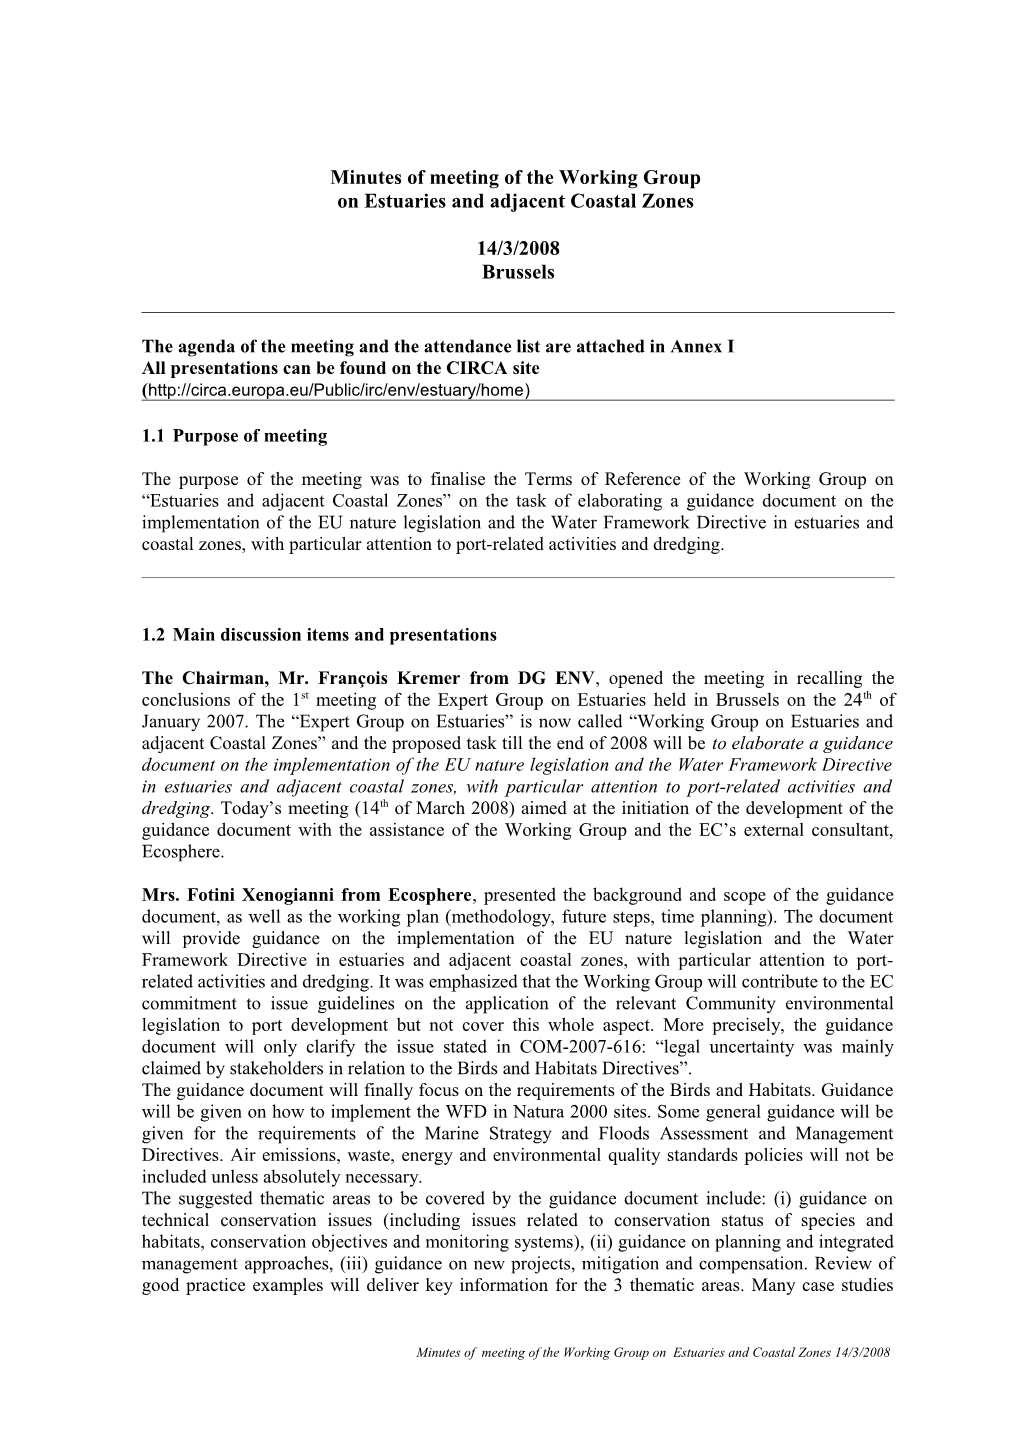 Minutes of Meeting of the Working Group